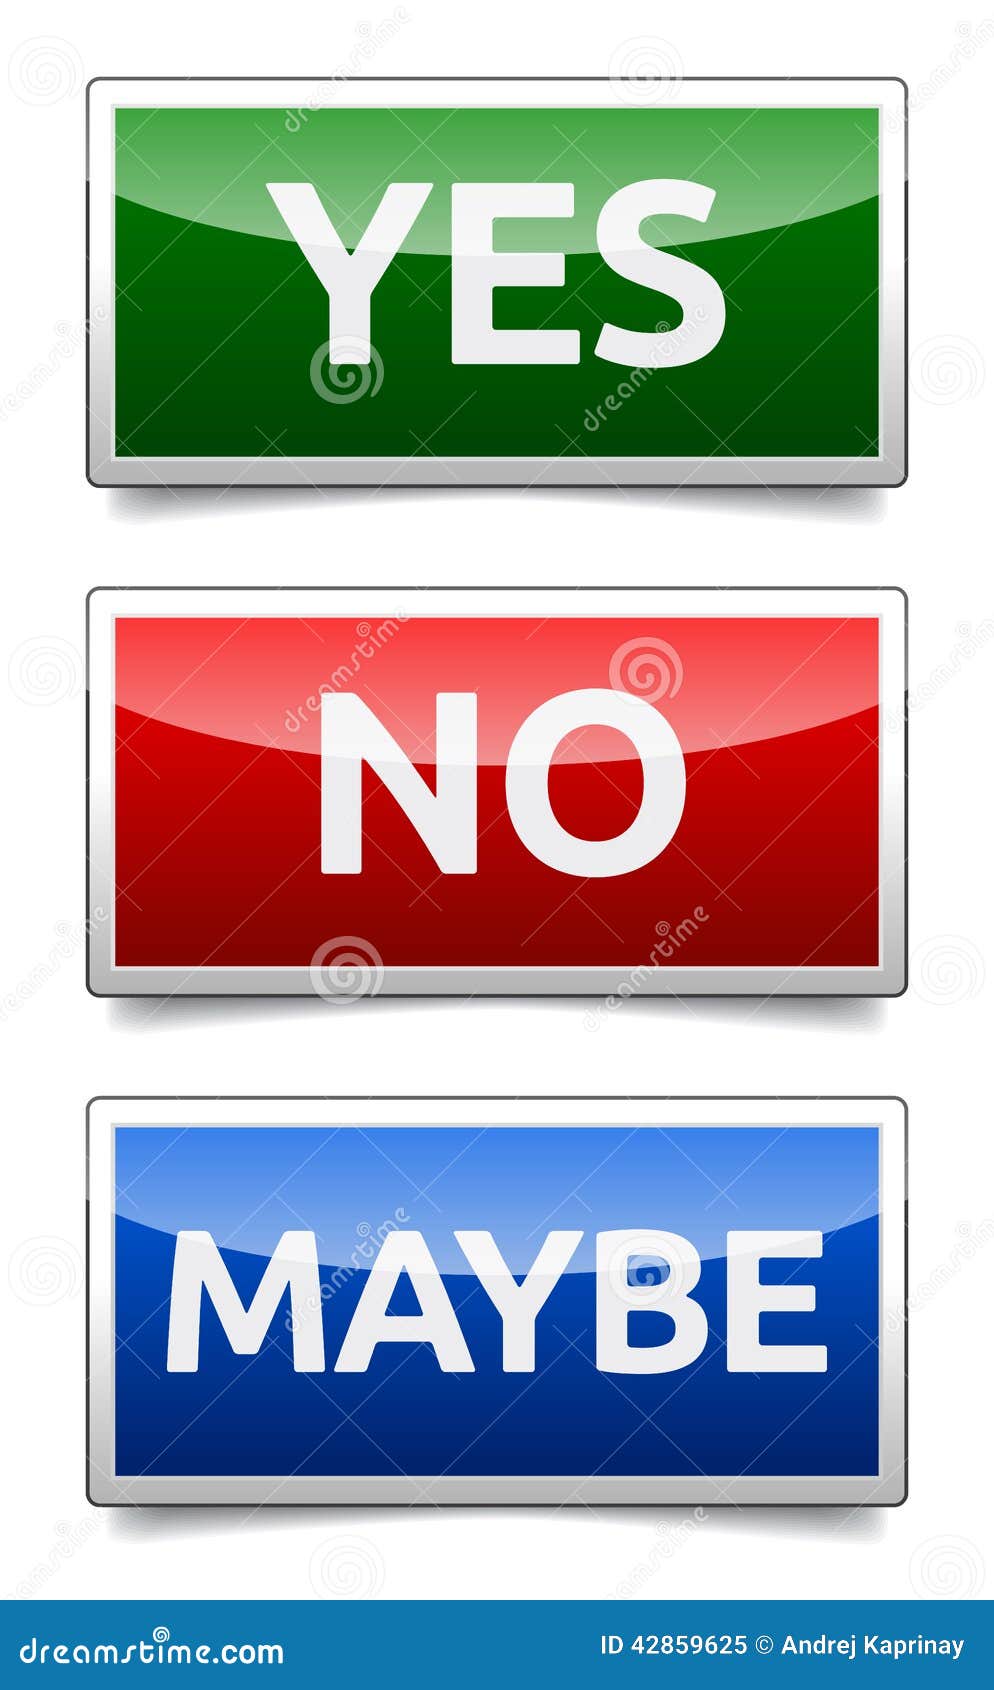 yes-no-maybe-3-colorful-arrow-signs-royalty-free-stock-photo